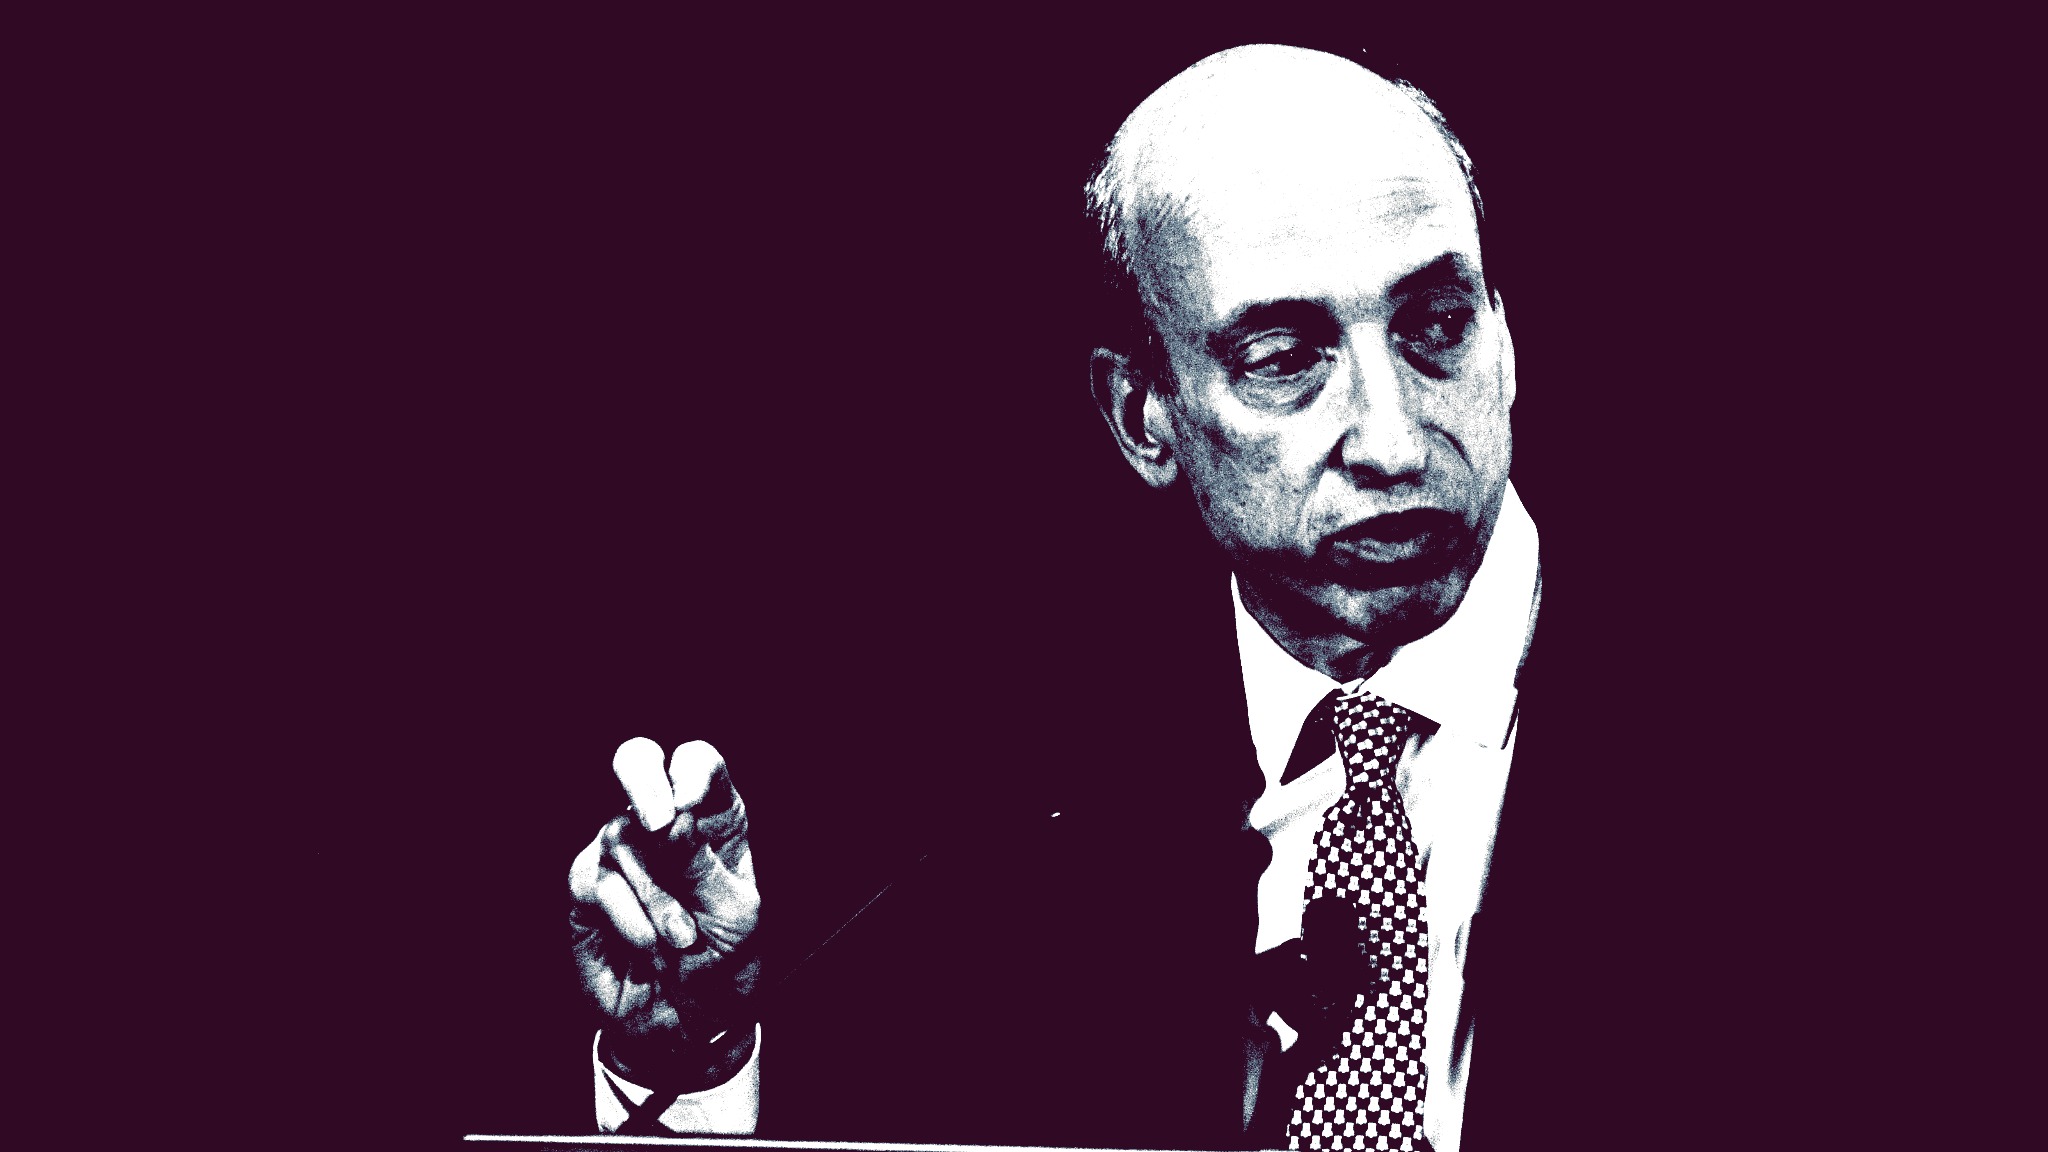 Securities and Exchange Commission Chairman SEC Gary Gensler (Jesse Hamilton/CoinDesk, modified)